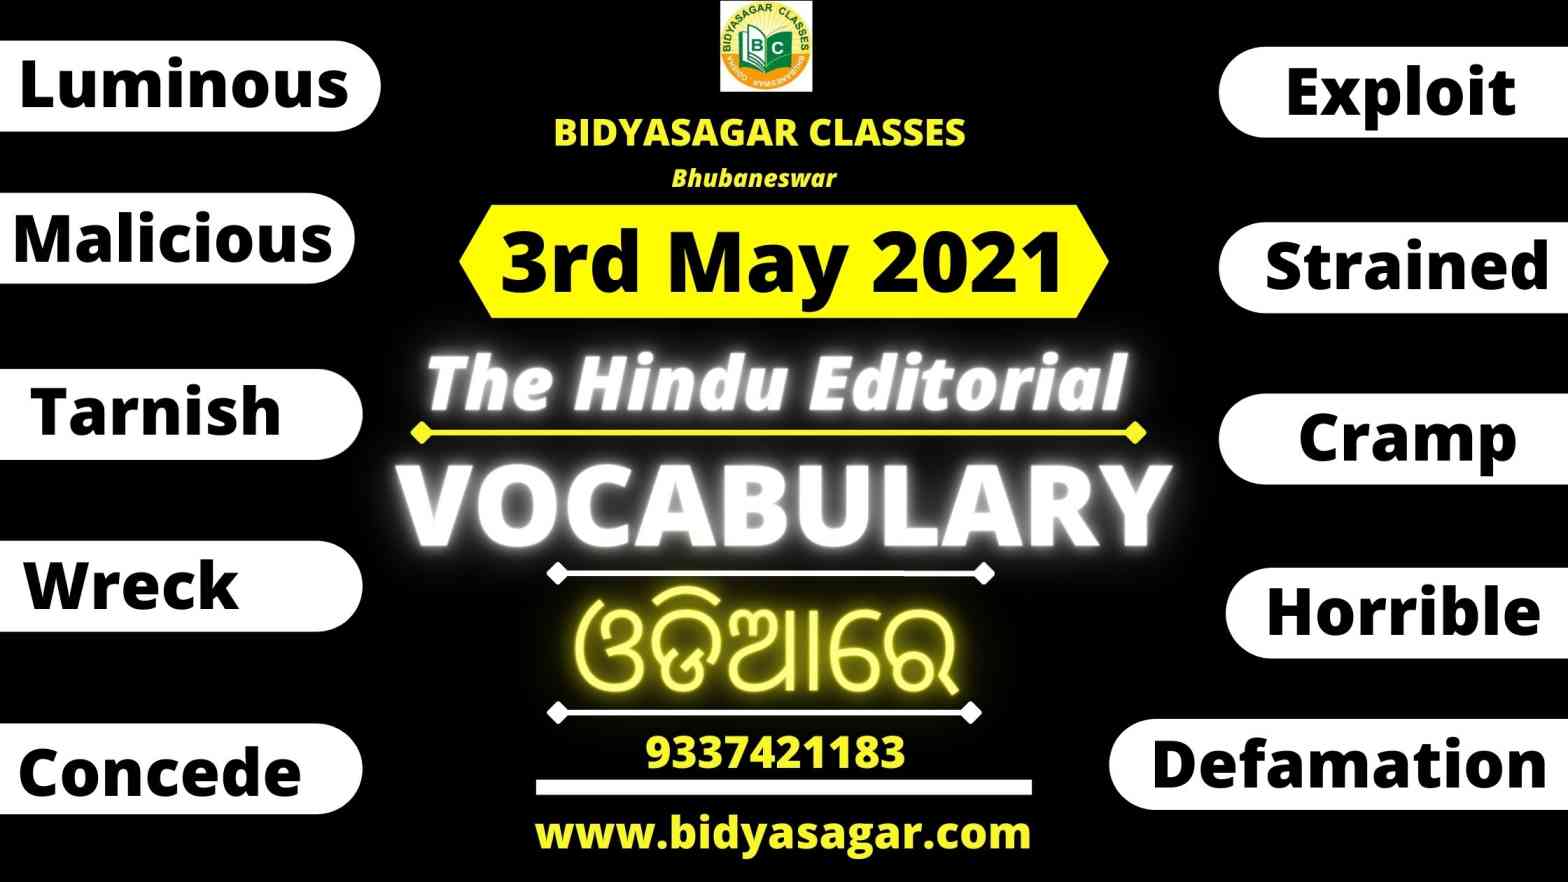 The Hindu Editorial Vocabulary of 3rd May 2021